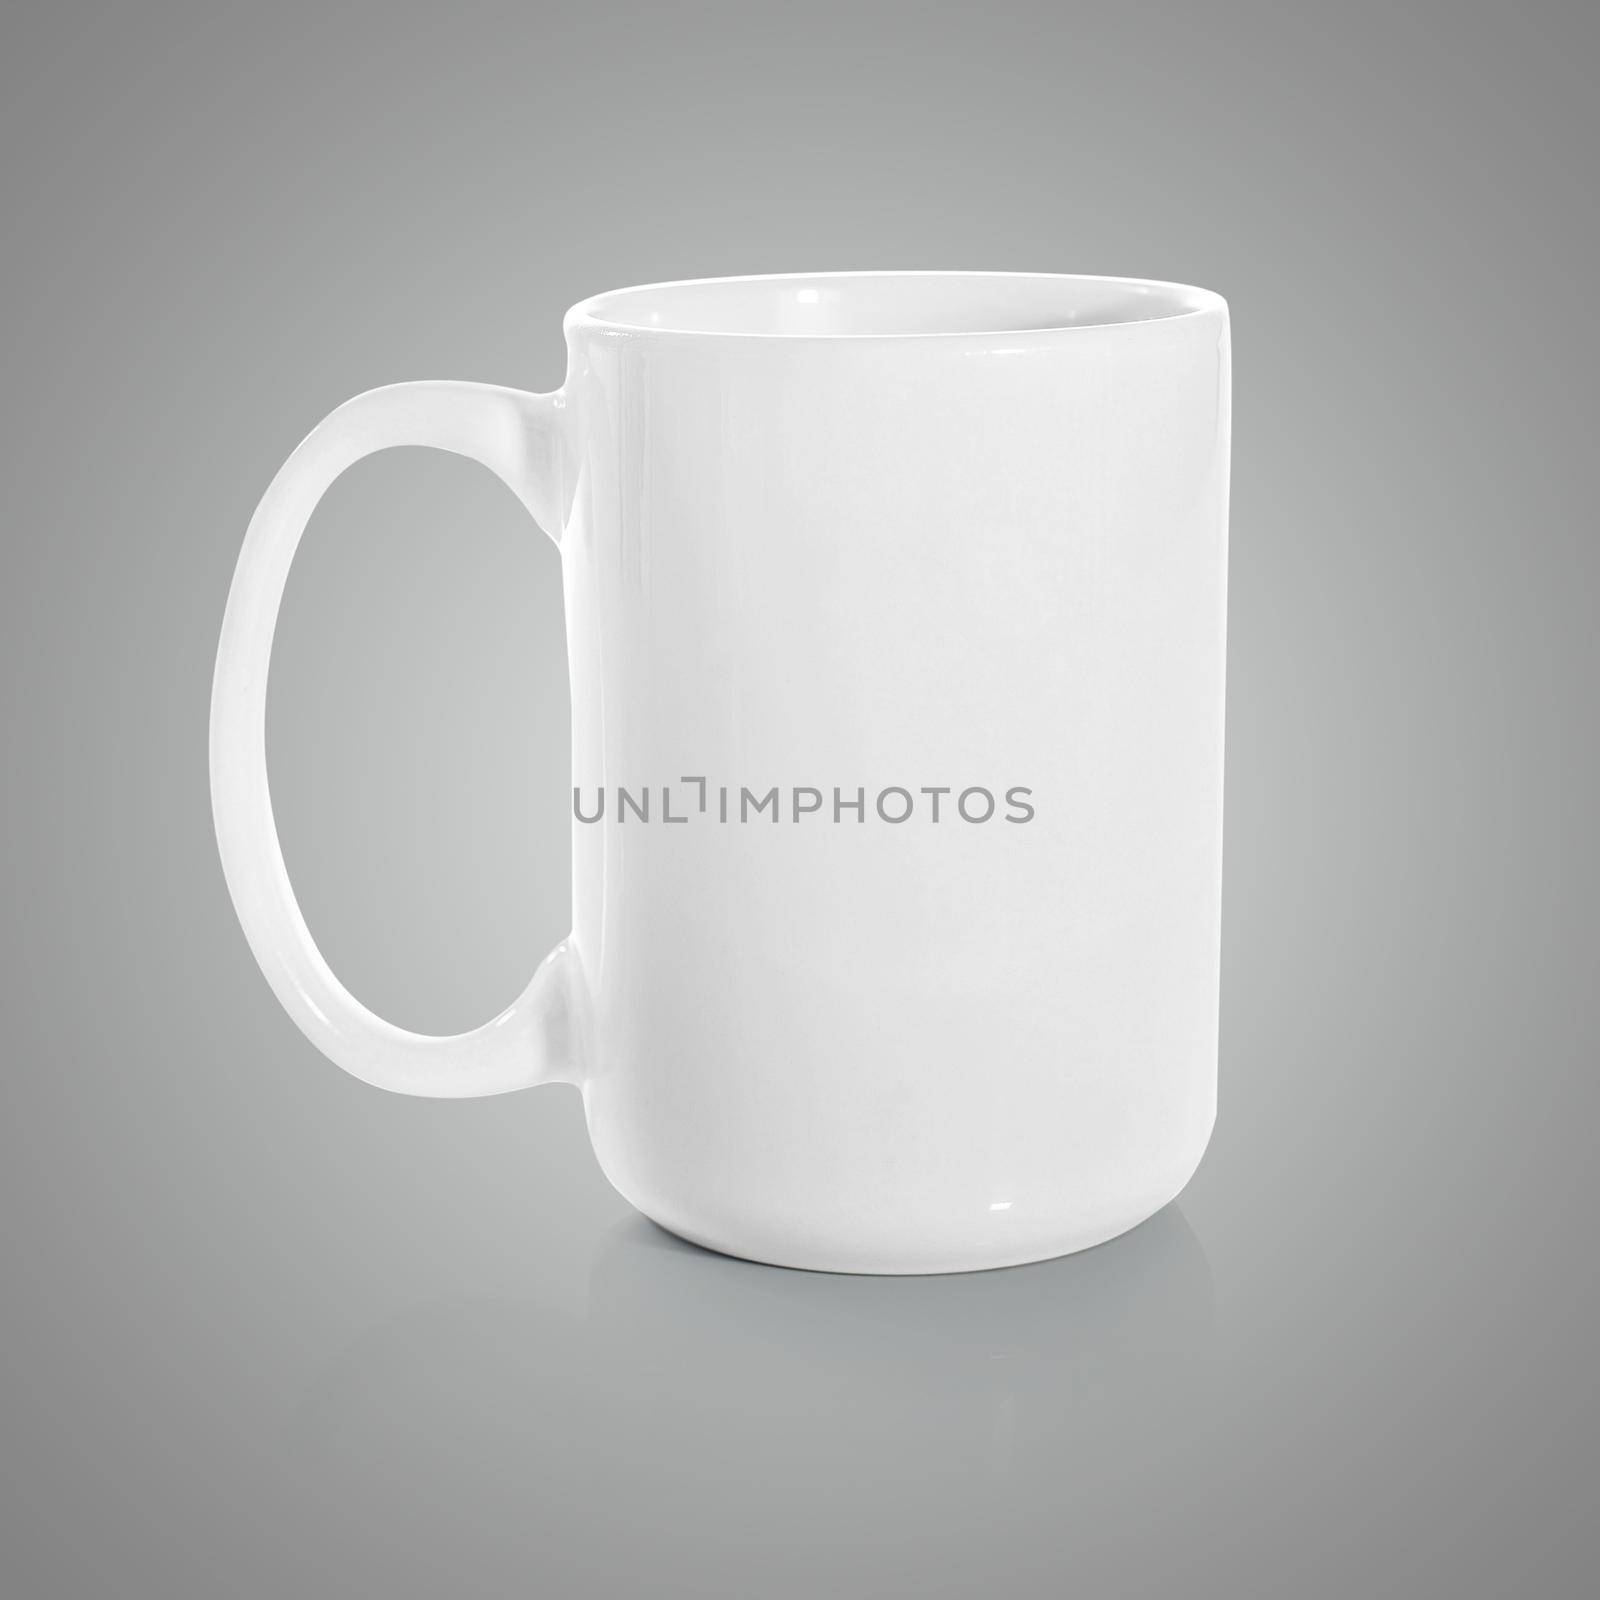 Cup white on gray background